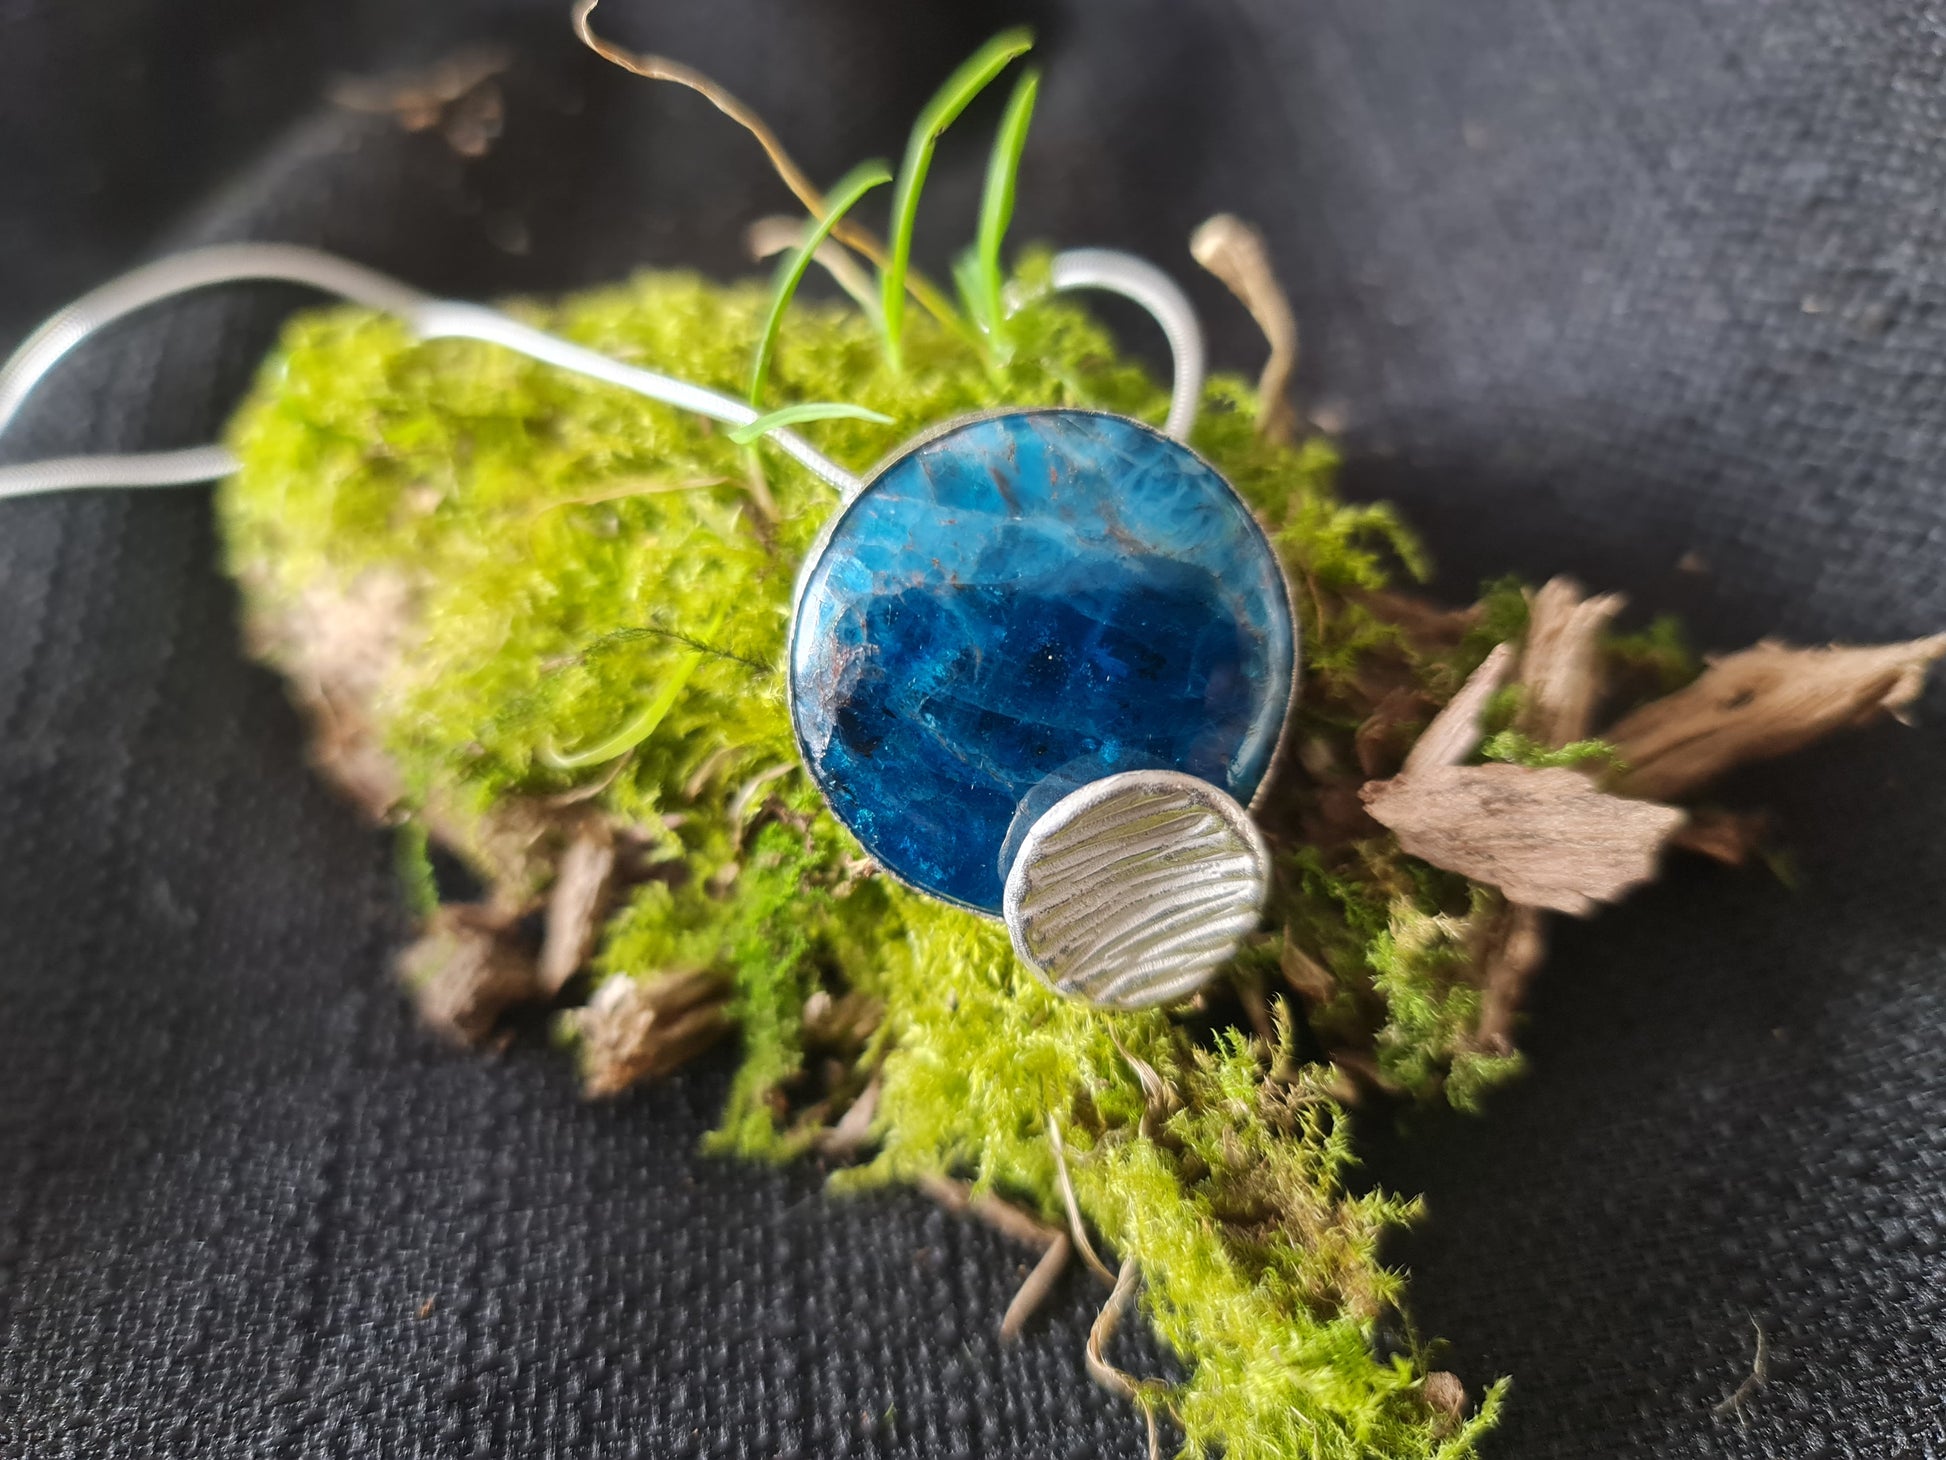 3 cm apatite cabochon with a 1 cm sterling silver concave circle pendant shown on moss as it is inpired by nature